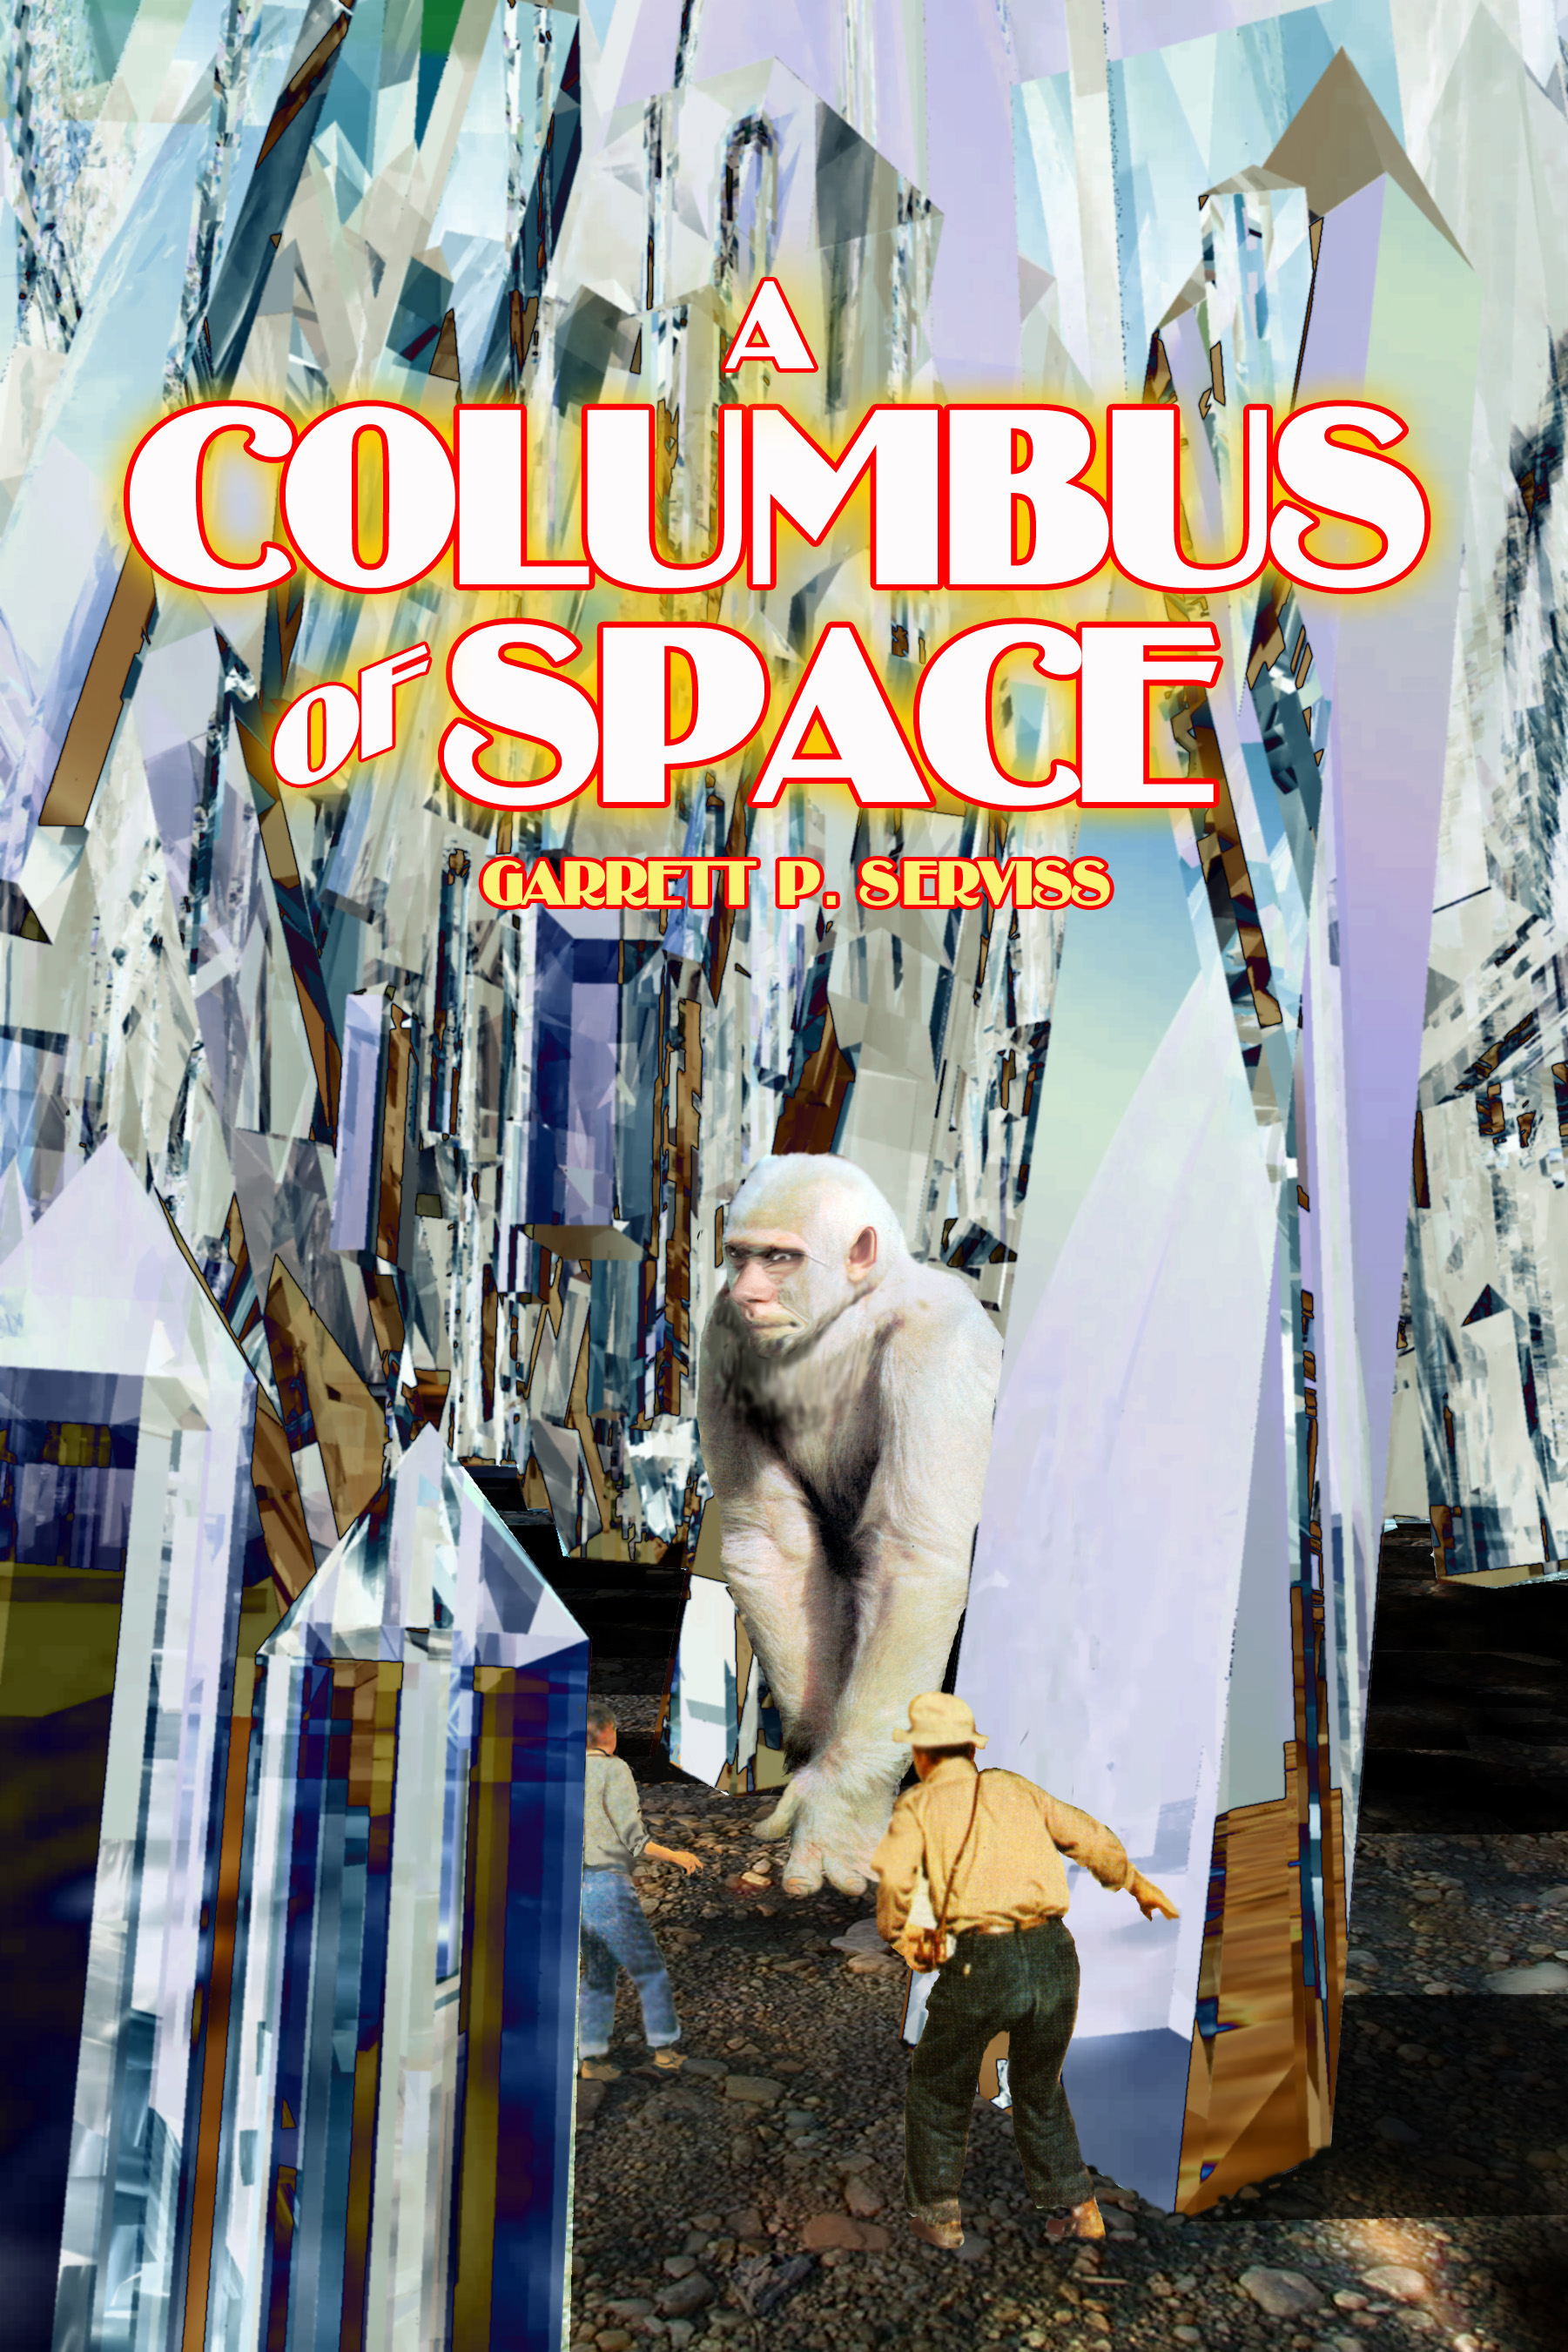 The Columbus of Space